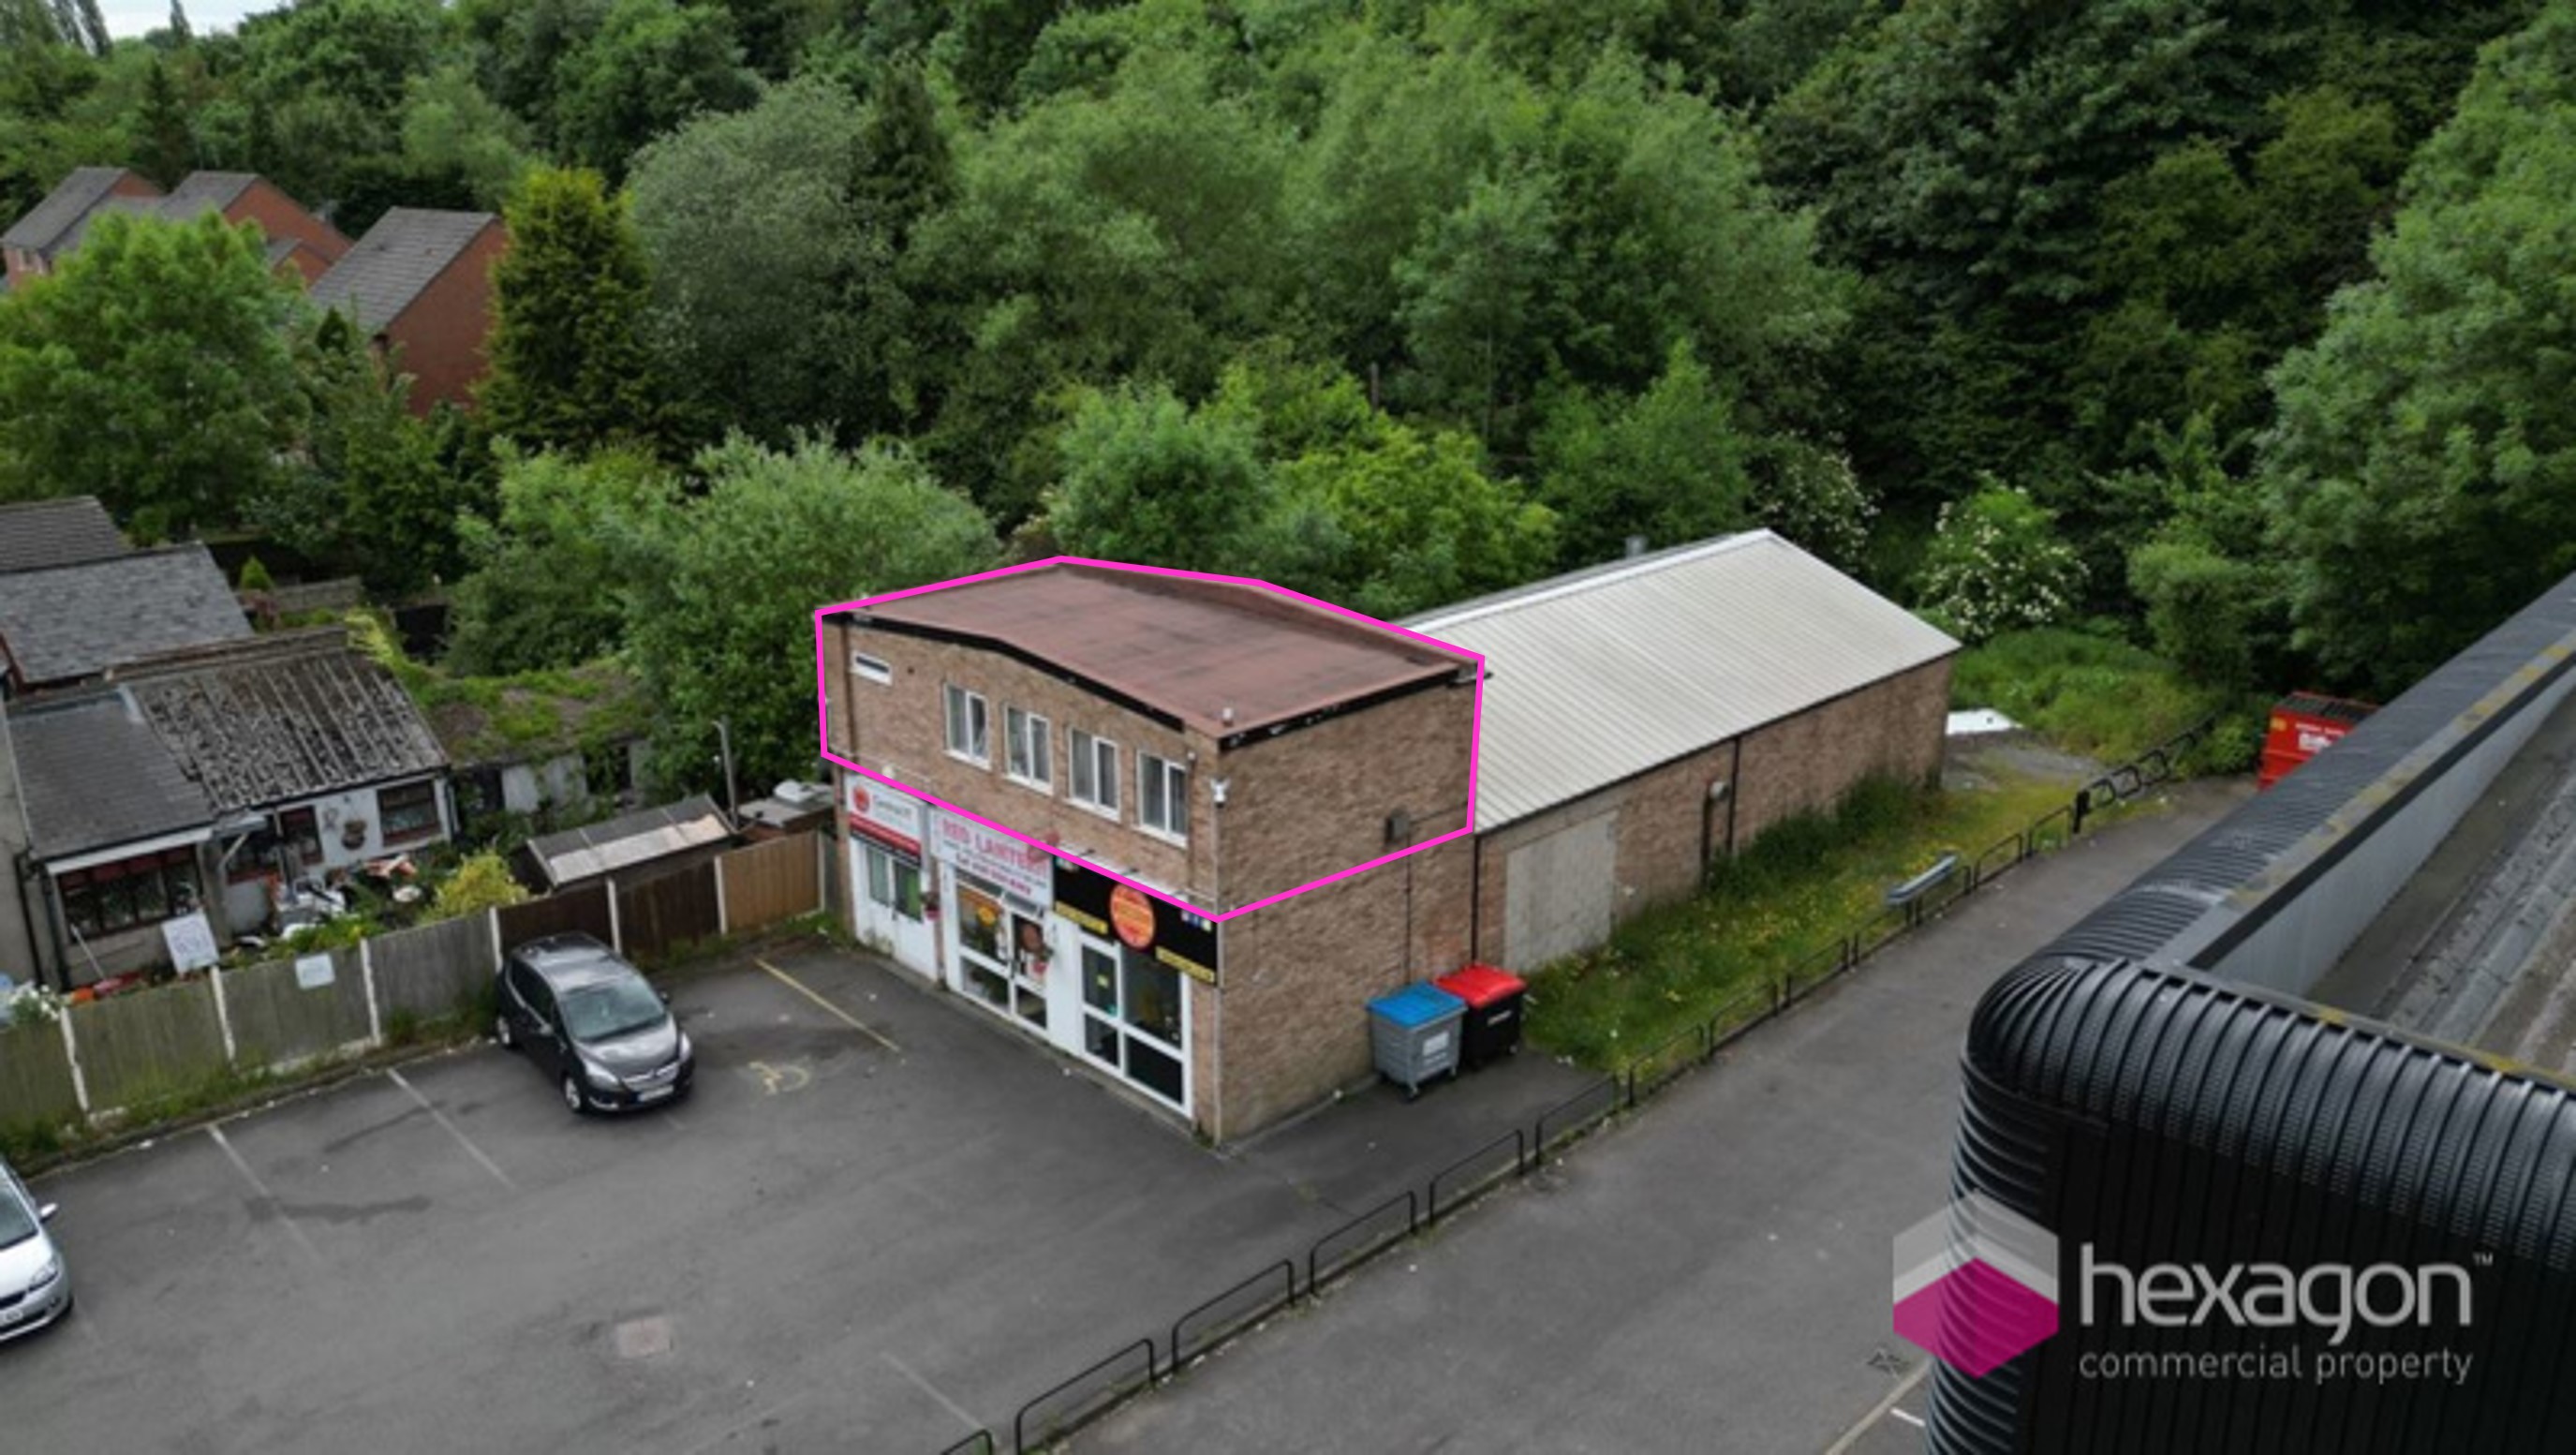 0 bed Office for rent in Halesowen. From Hexagon Commercial Property